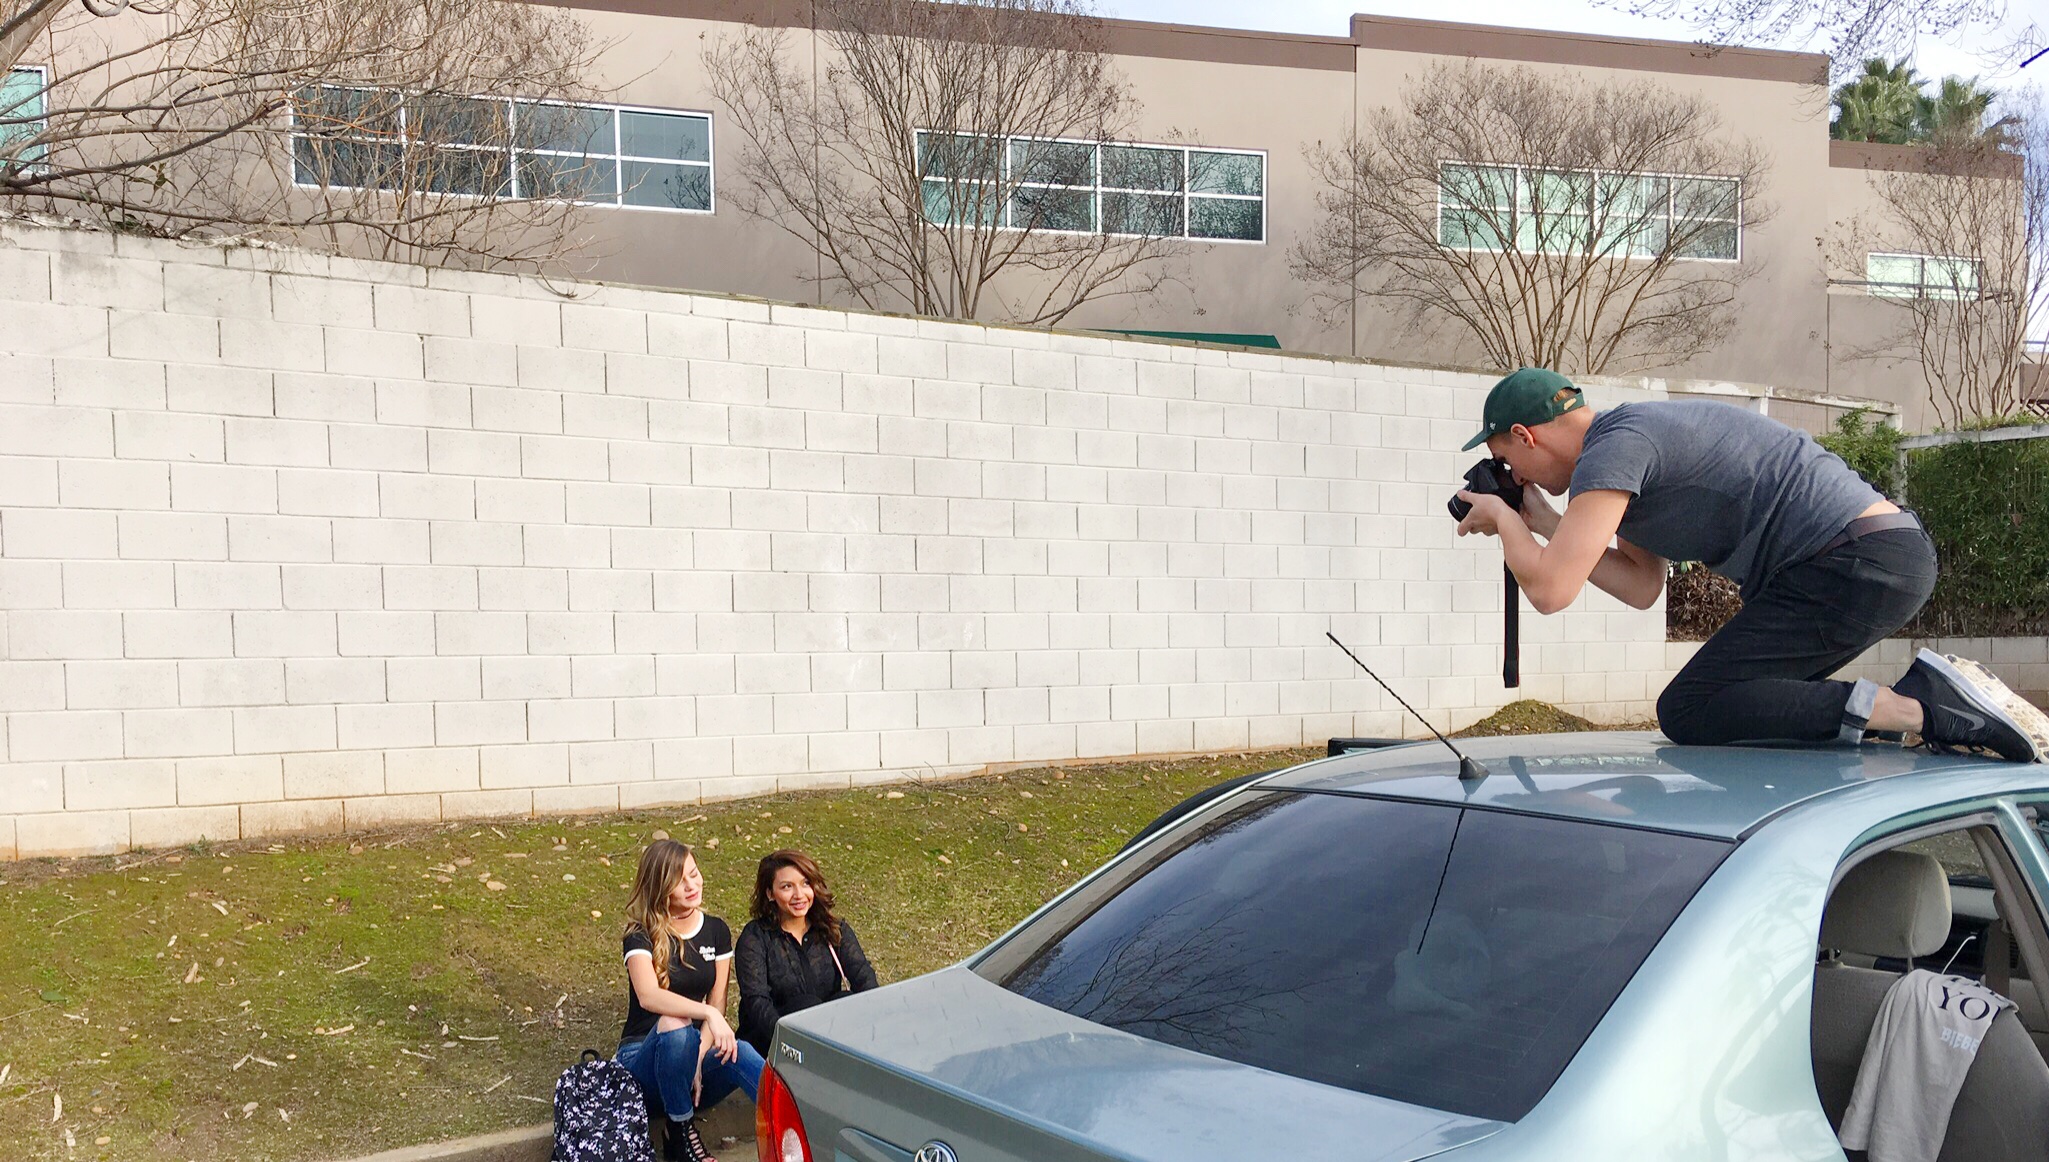 Getting the Shot on Top of a Car 